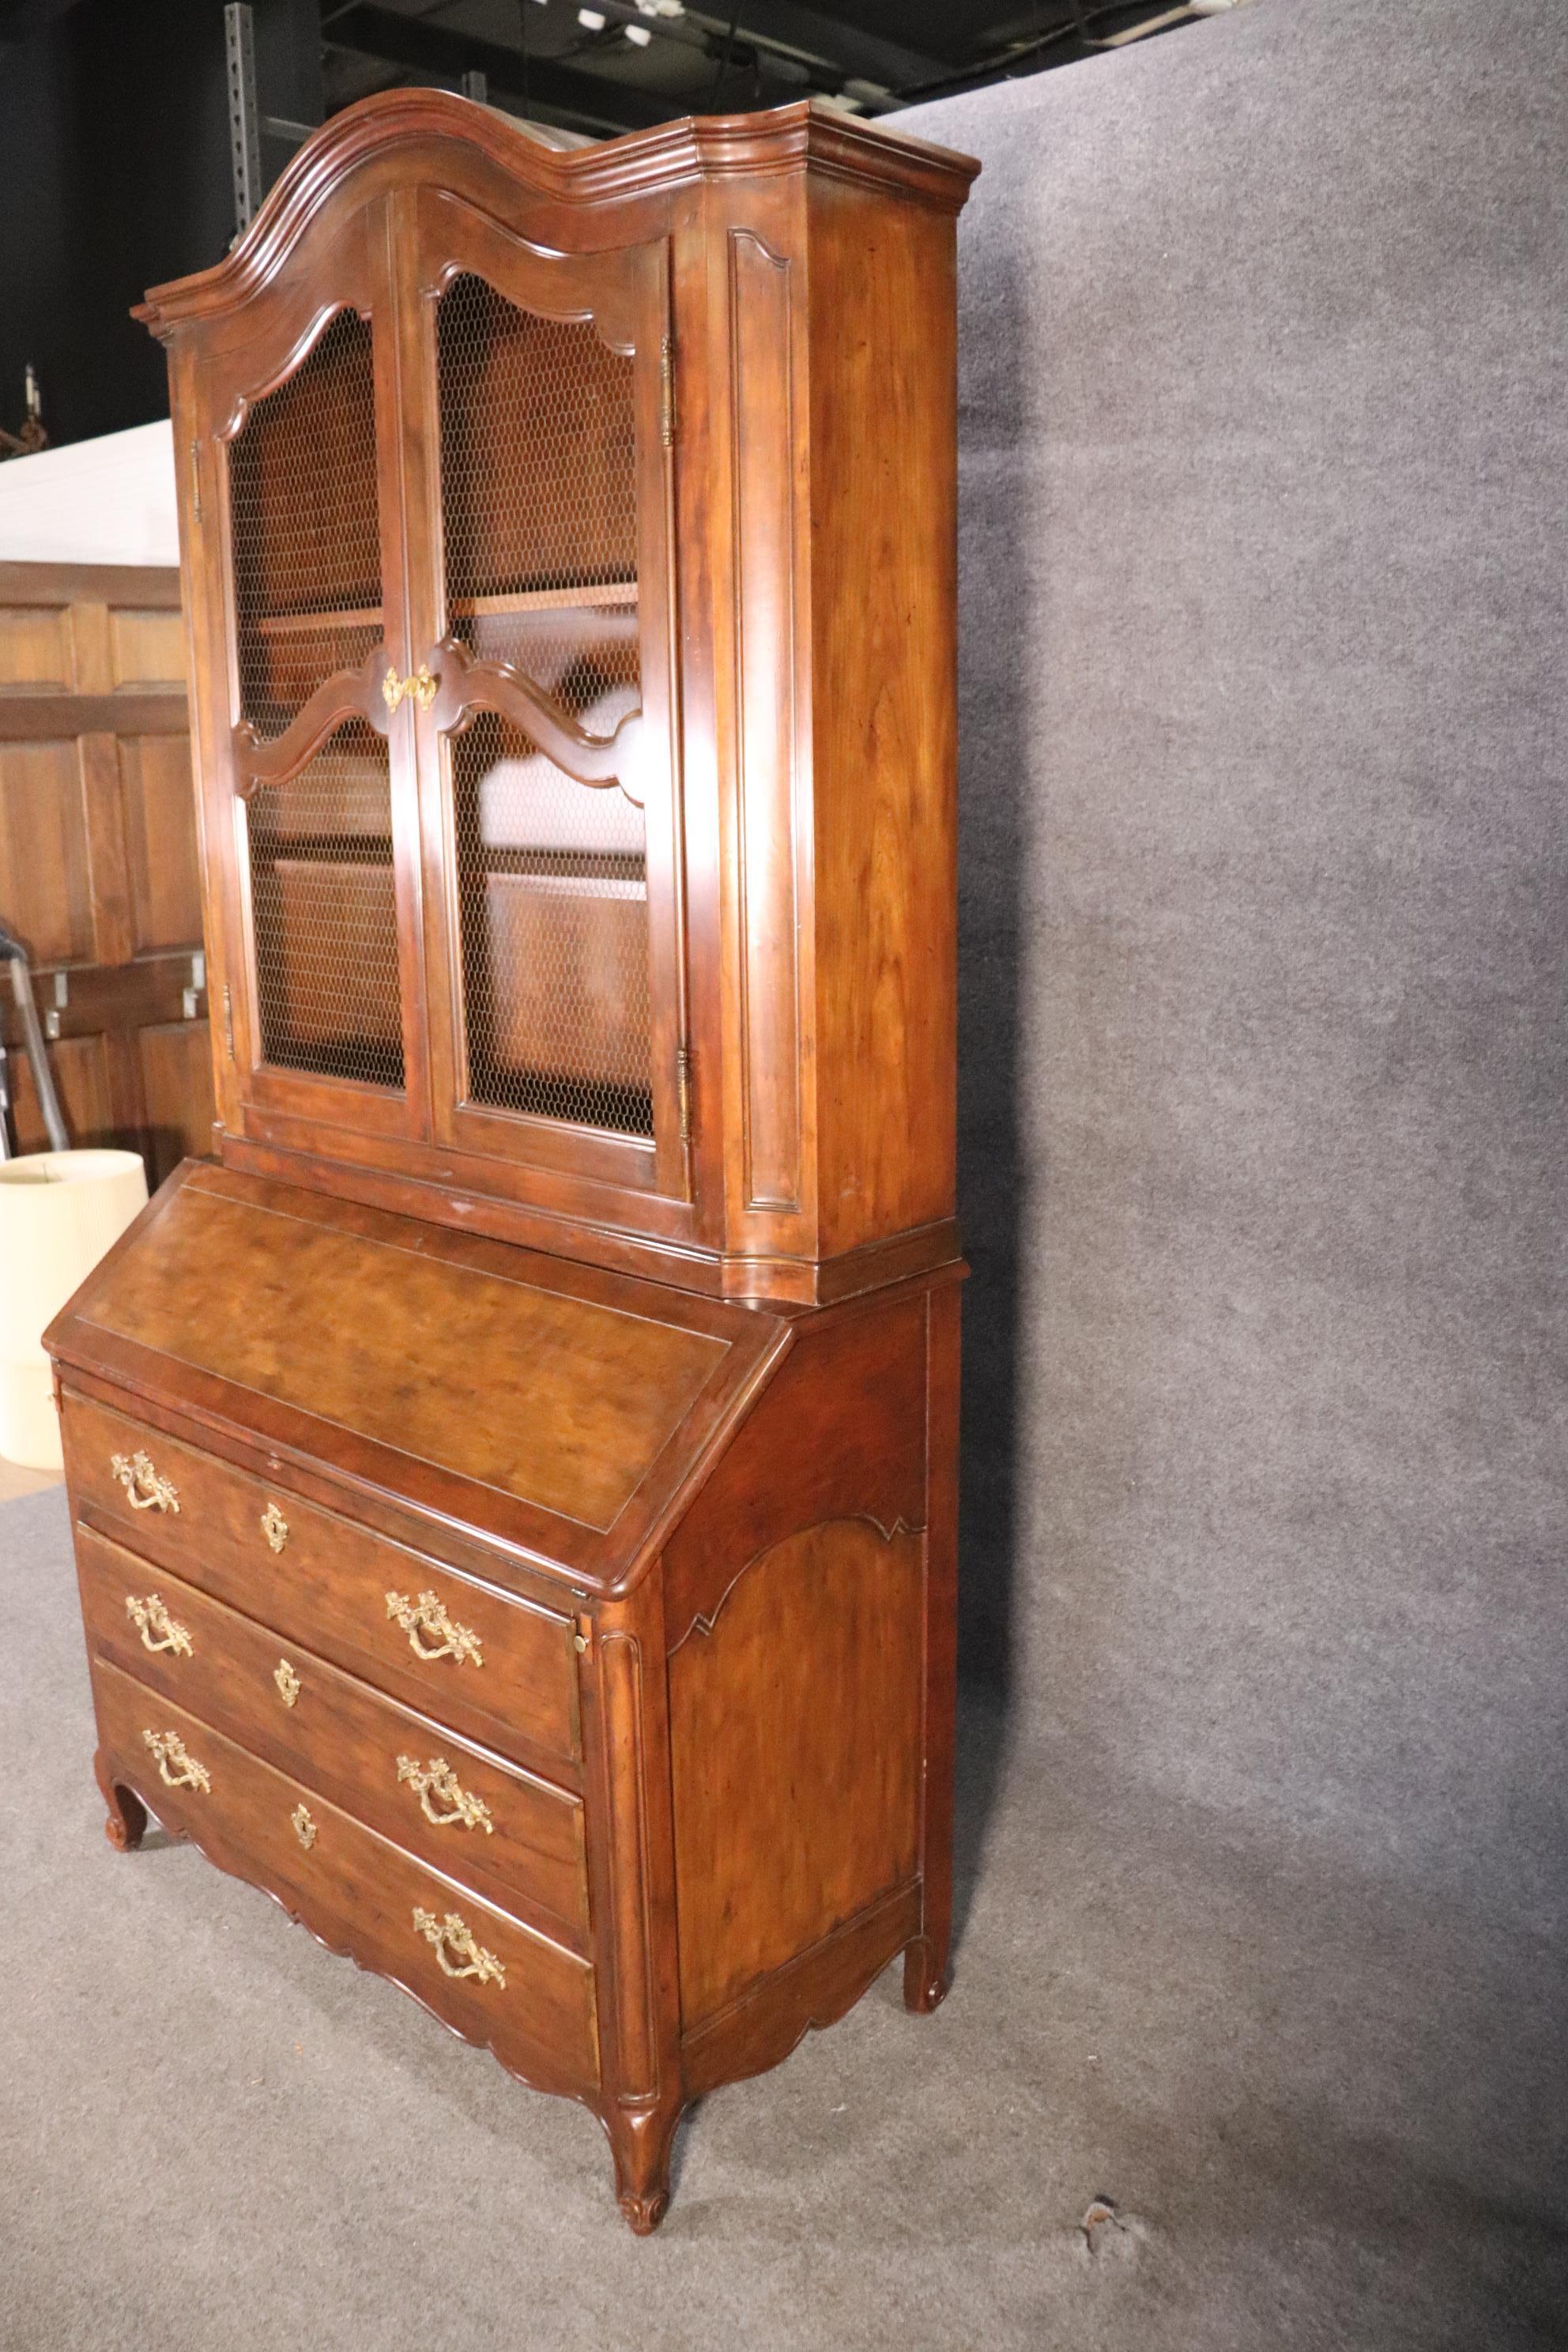 This is a rare item from Baker furniture. It's a French Louis XV style secretary desk in walnut with a mesh grill set for the doors. The desk measures 89 tall x 47 wide x 21 deep. The desk is in good vintage condition.